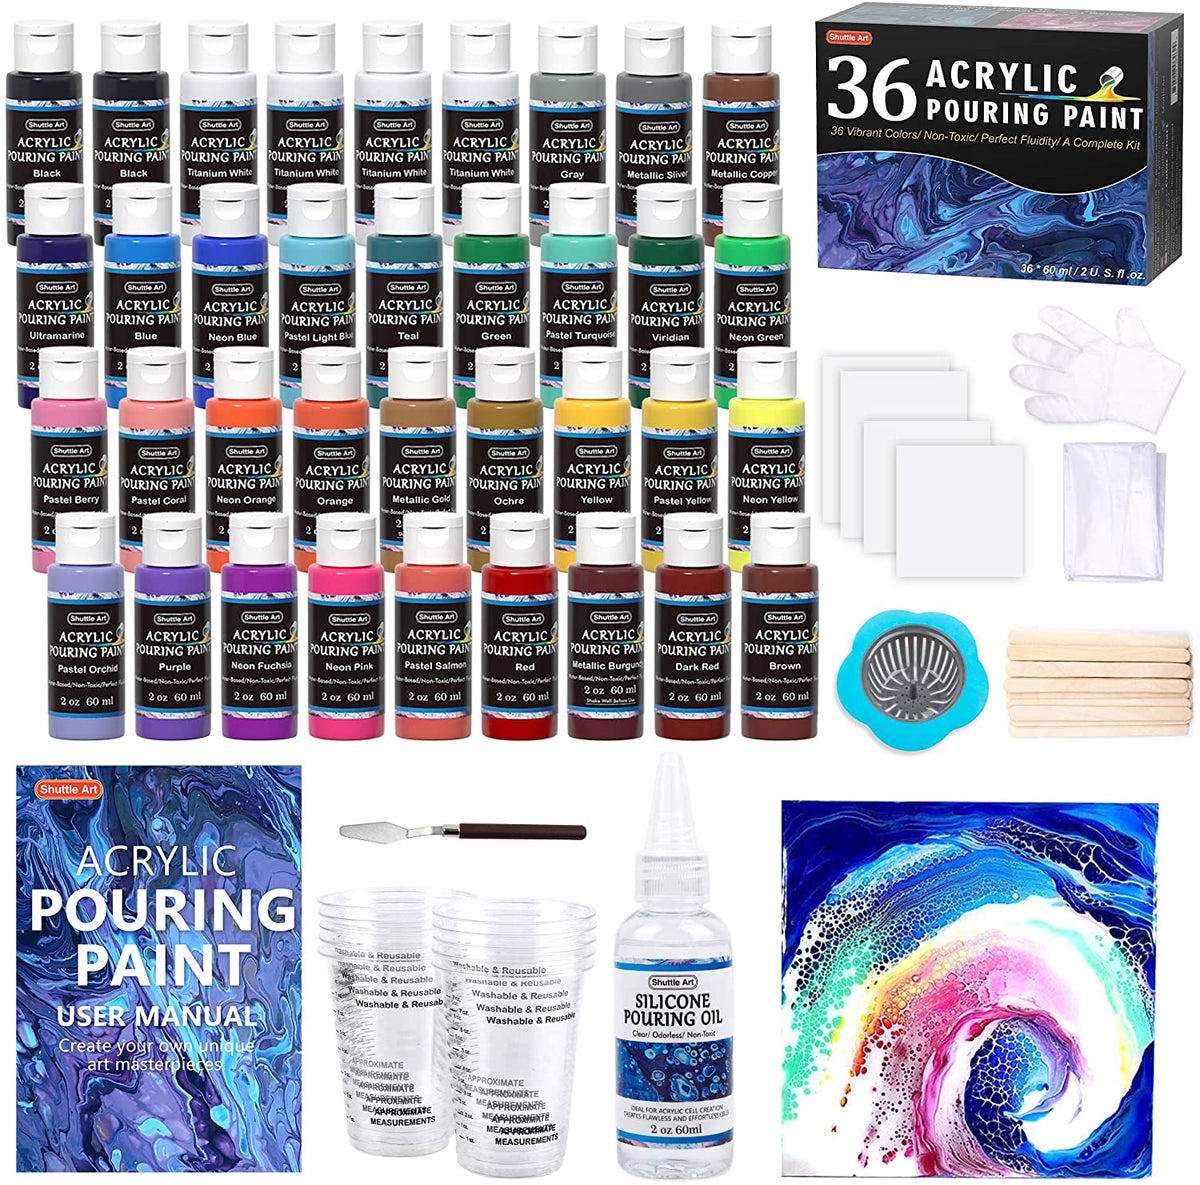 Acrylic Paint Set, Shuttle Art 36 Colors (60ml, 2oz) with 3 Brushes & 1  Palette, Craft painting, Rich Pigments,Non-Toxic for Artists,Beginners and  Kids on Rocks, Crafts, Canvas,Wood, Fabric 